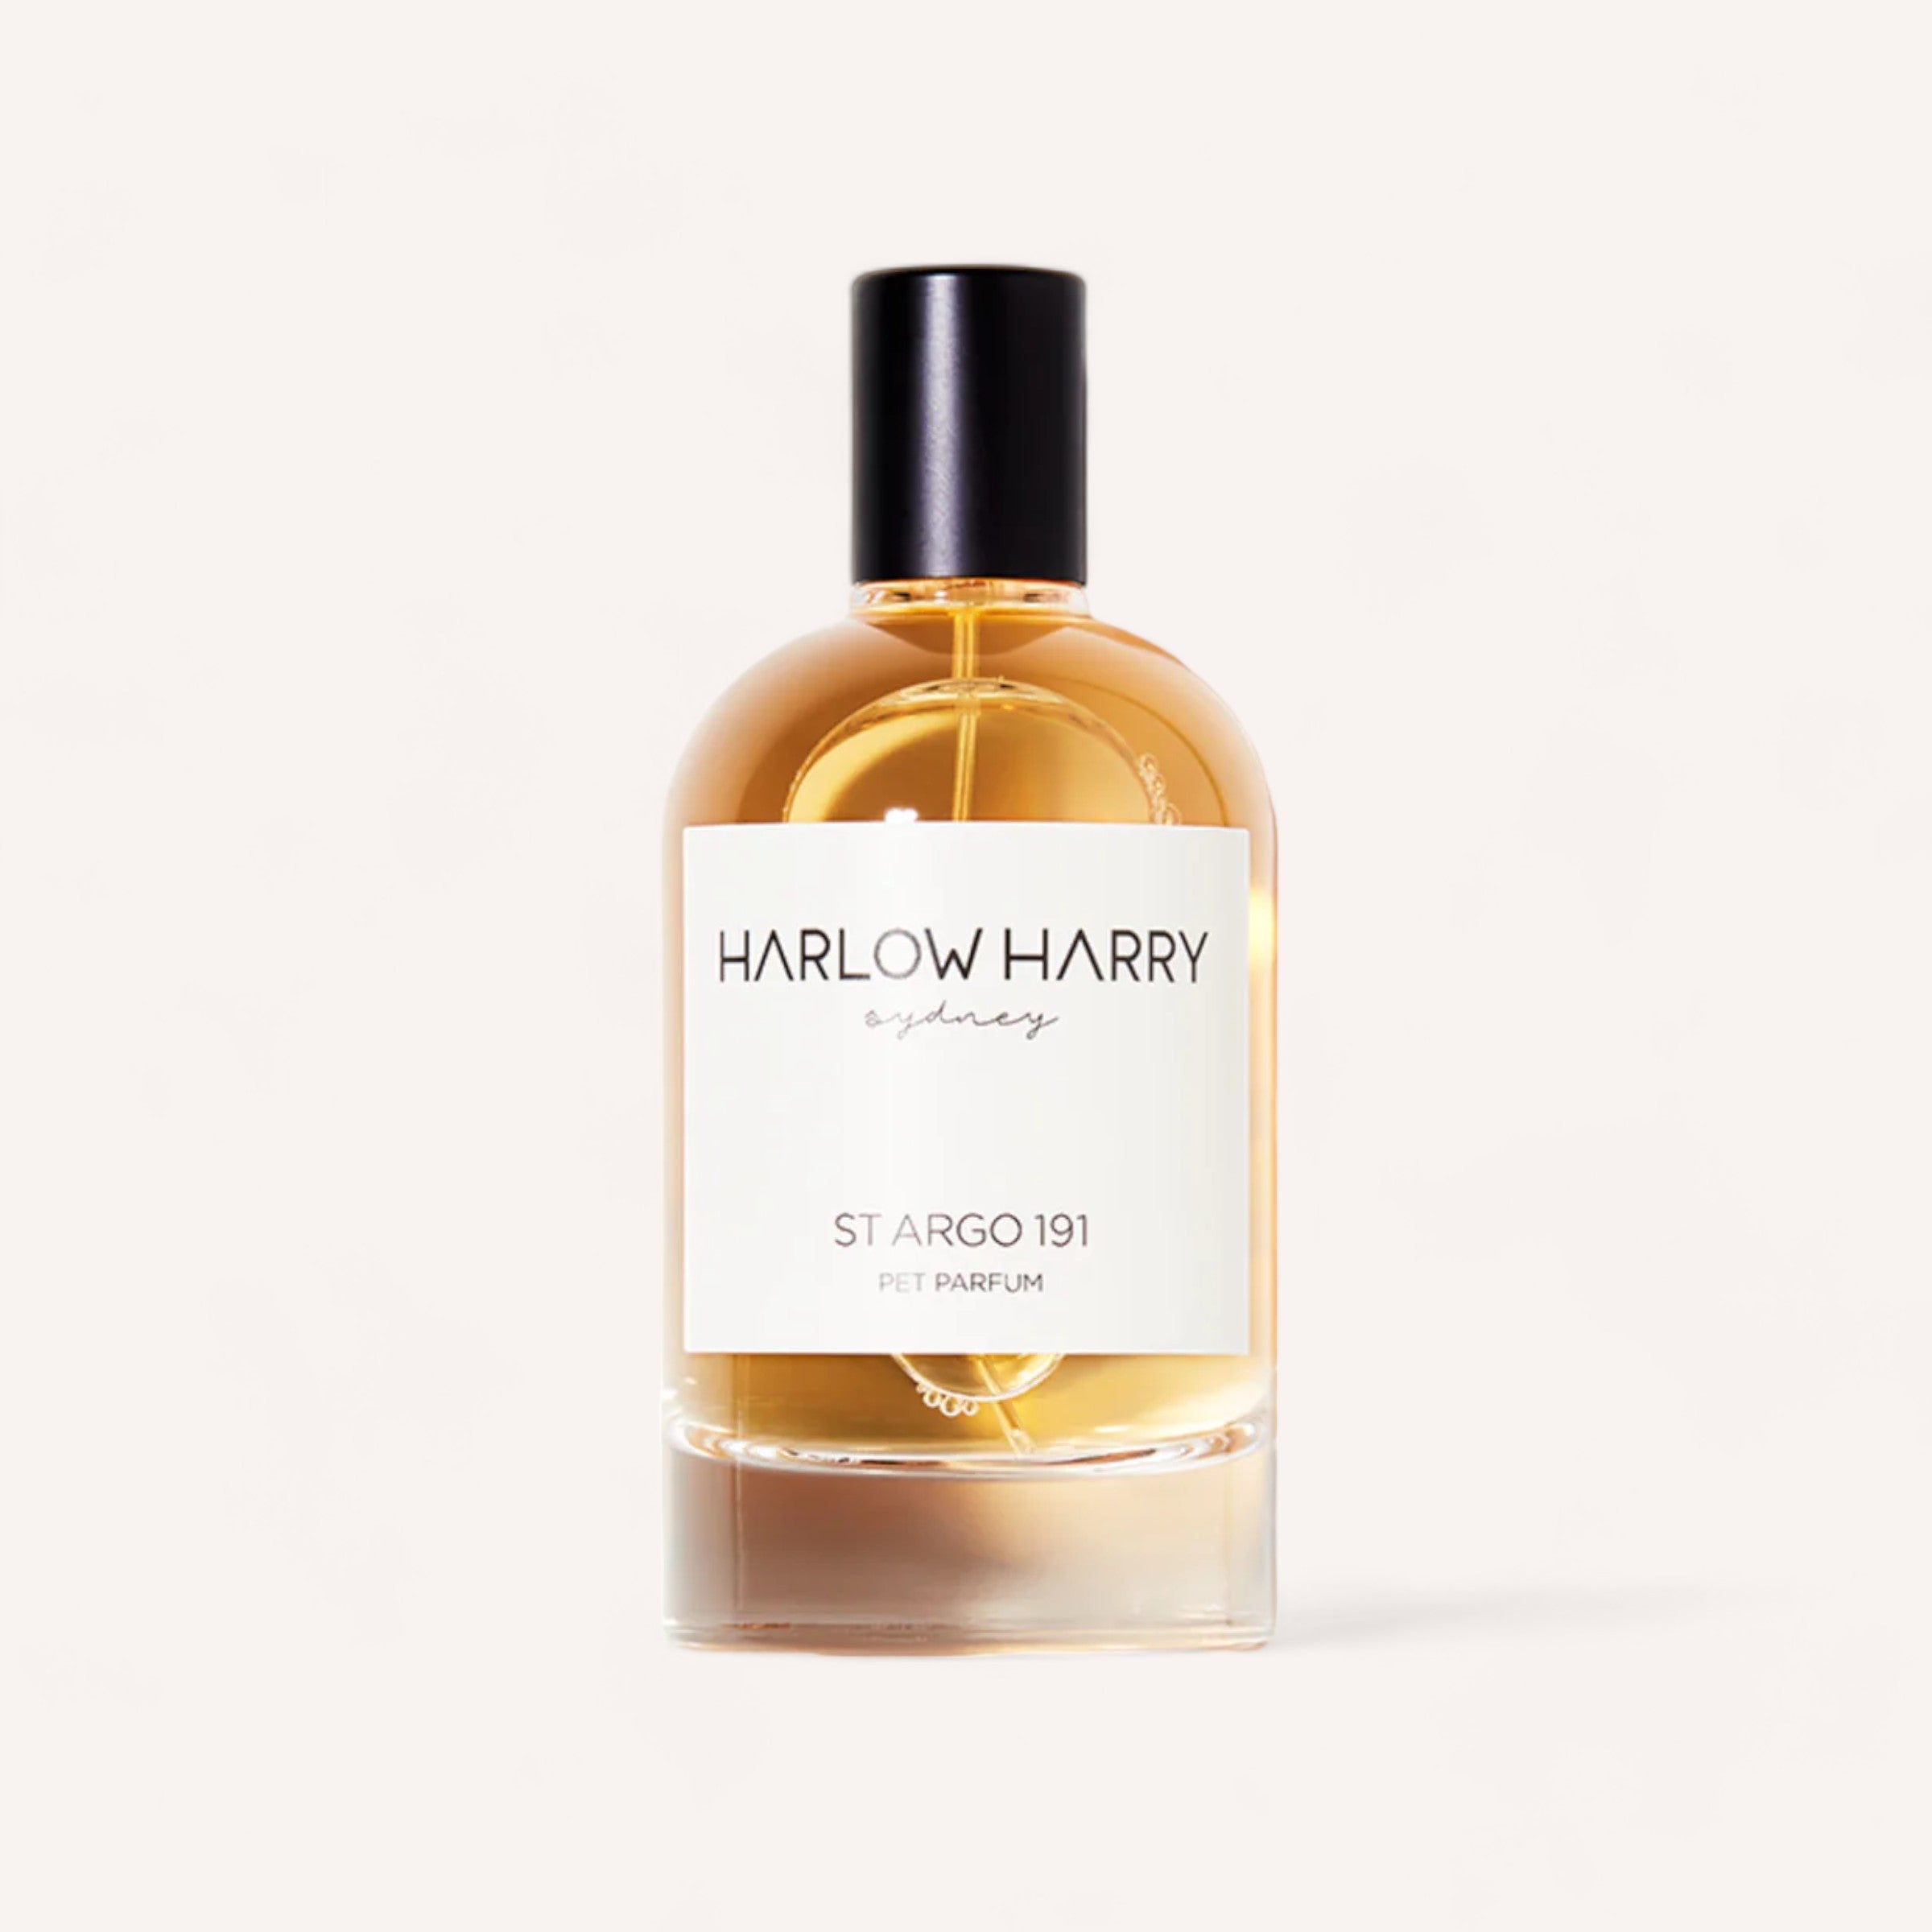 A sleek bottle of Harlow Harry St Argo 191 Dog Perfume on a clean, white background.